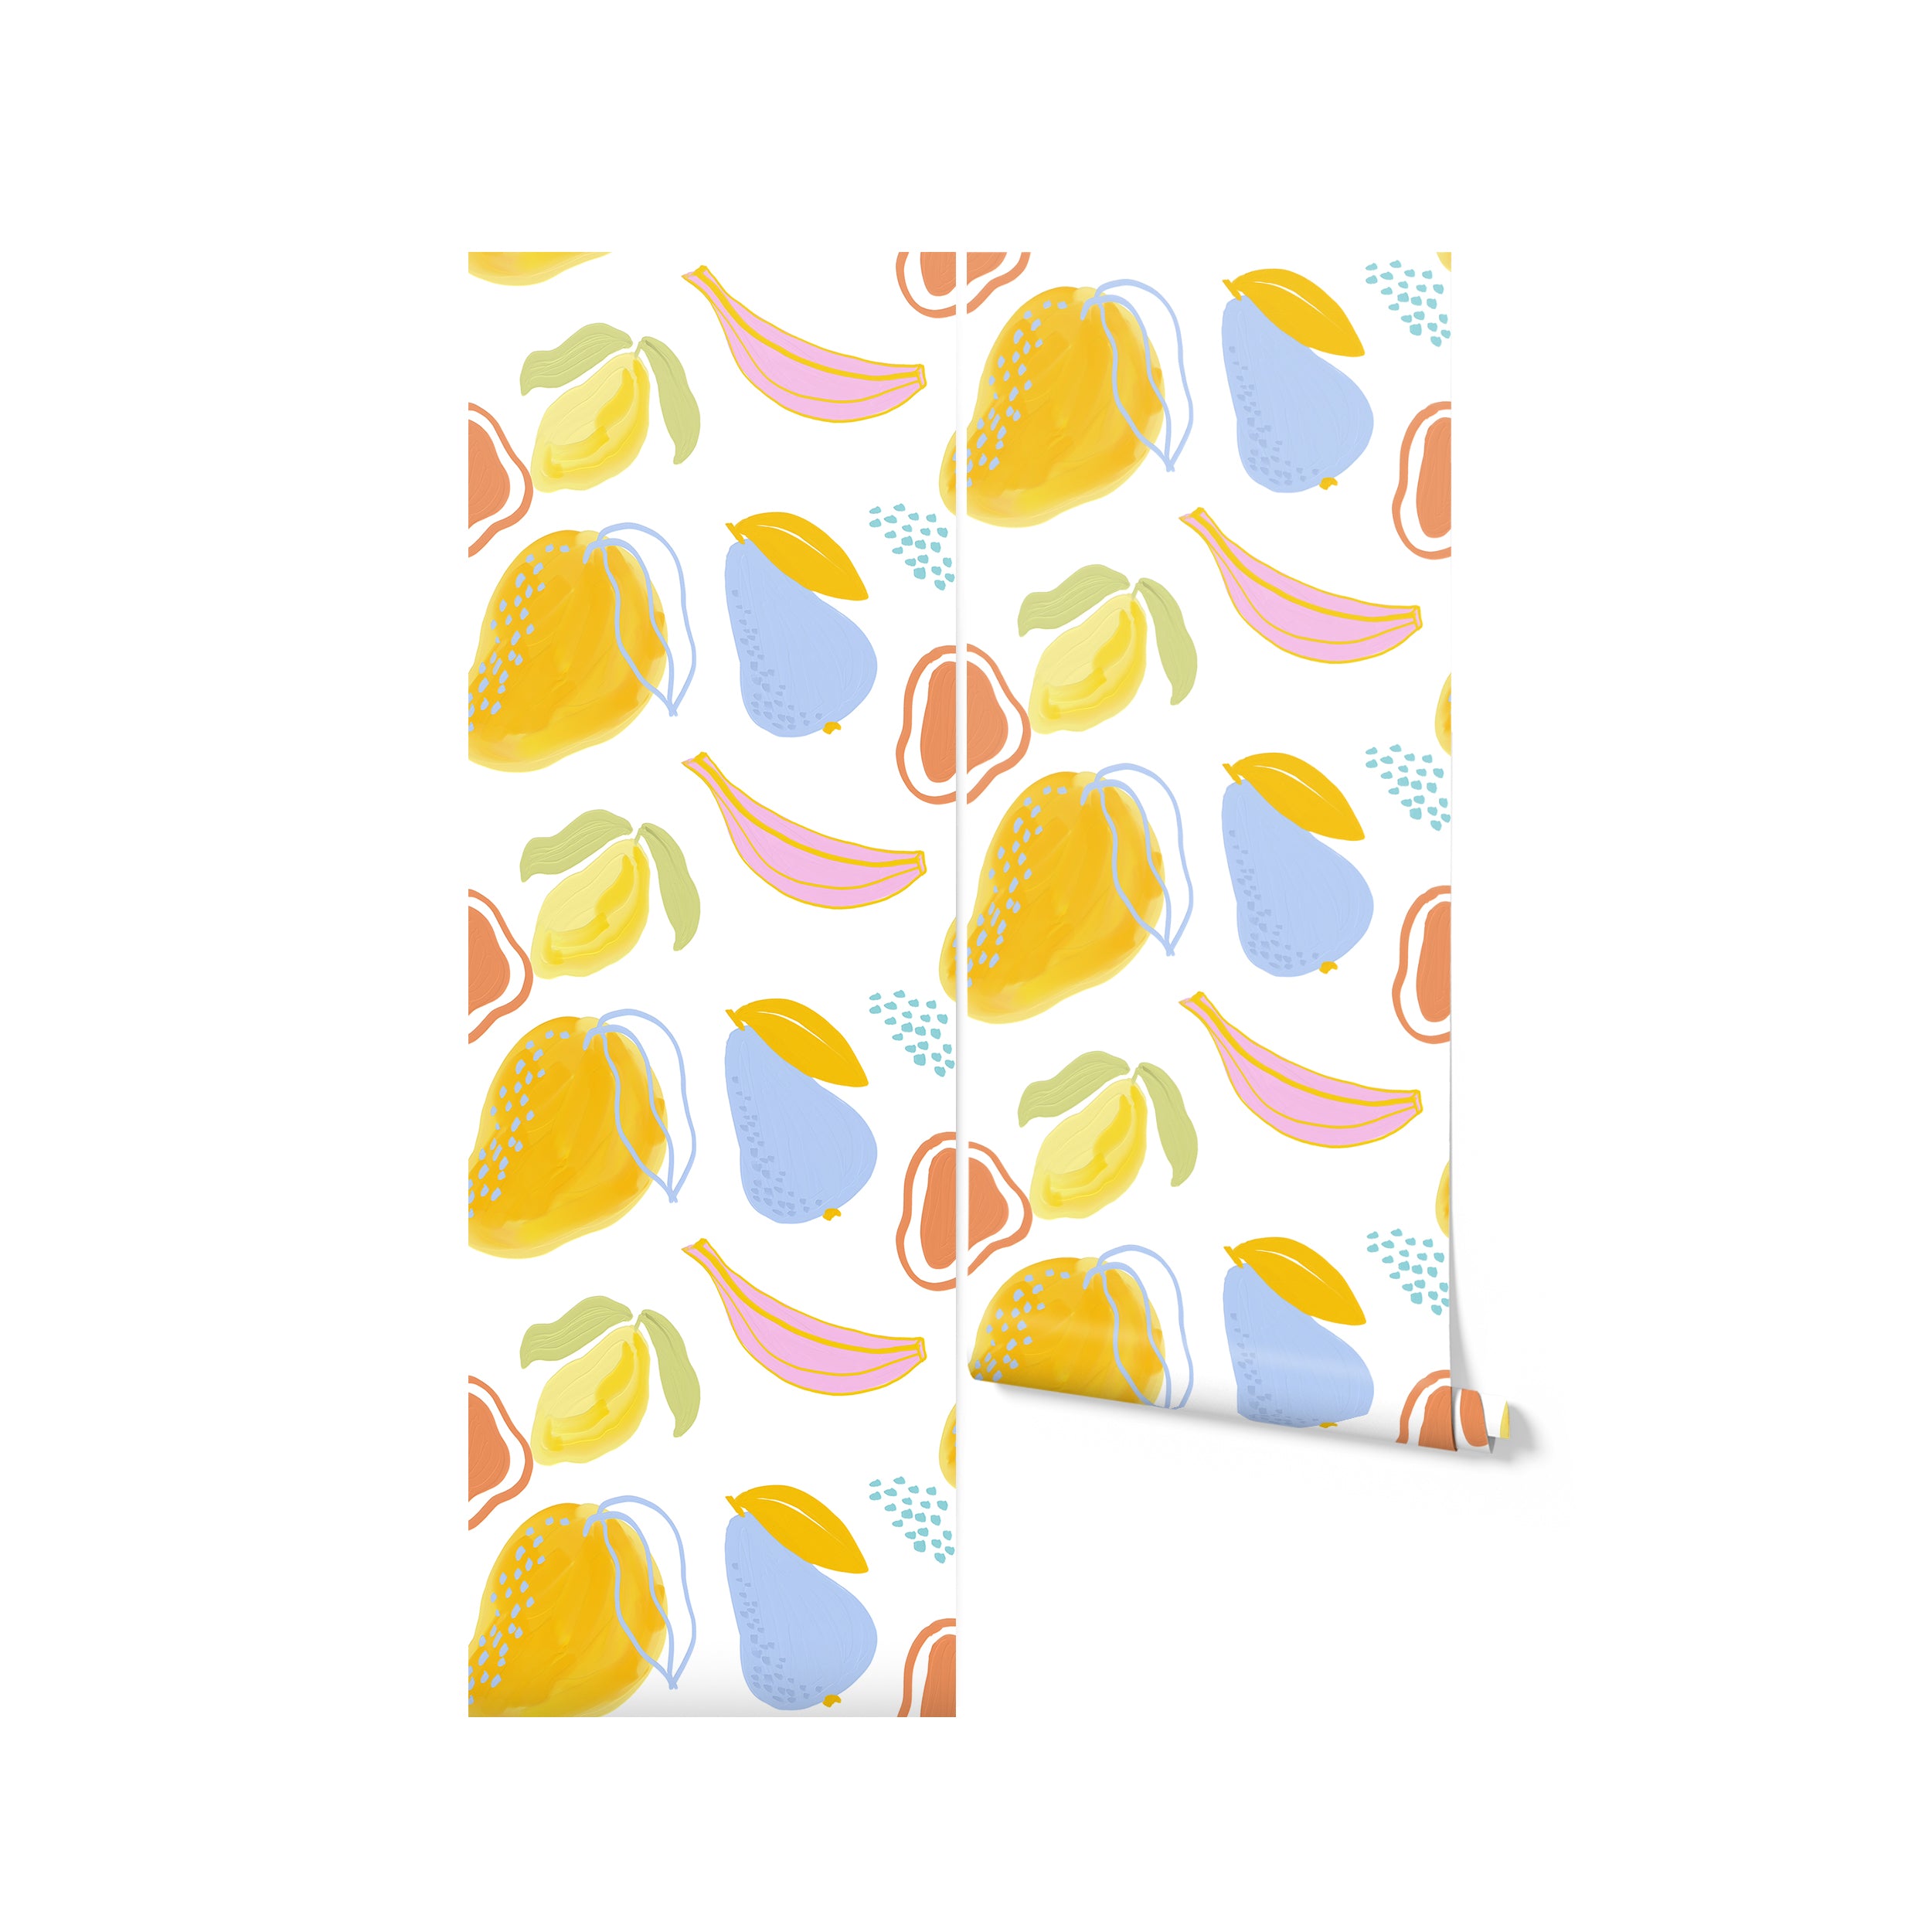 Roll of Colourful Abstract Oil Fruit Wallpaper with abstract fruit designs in pastel colors.